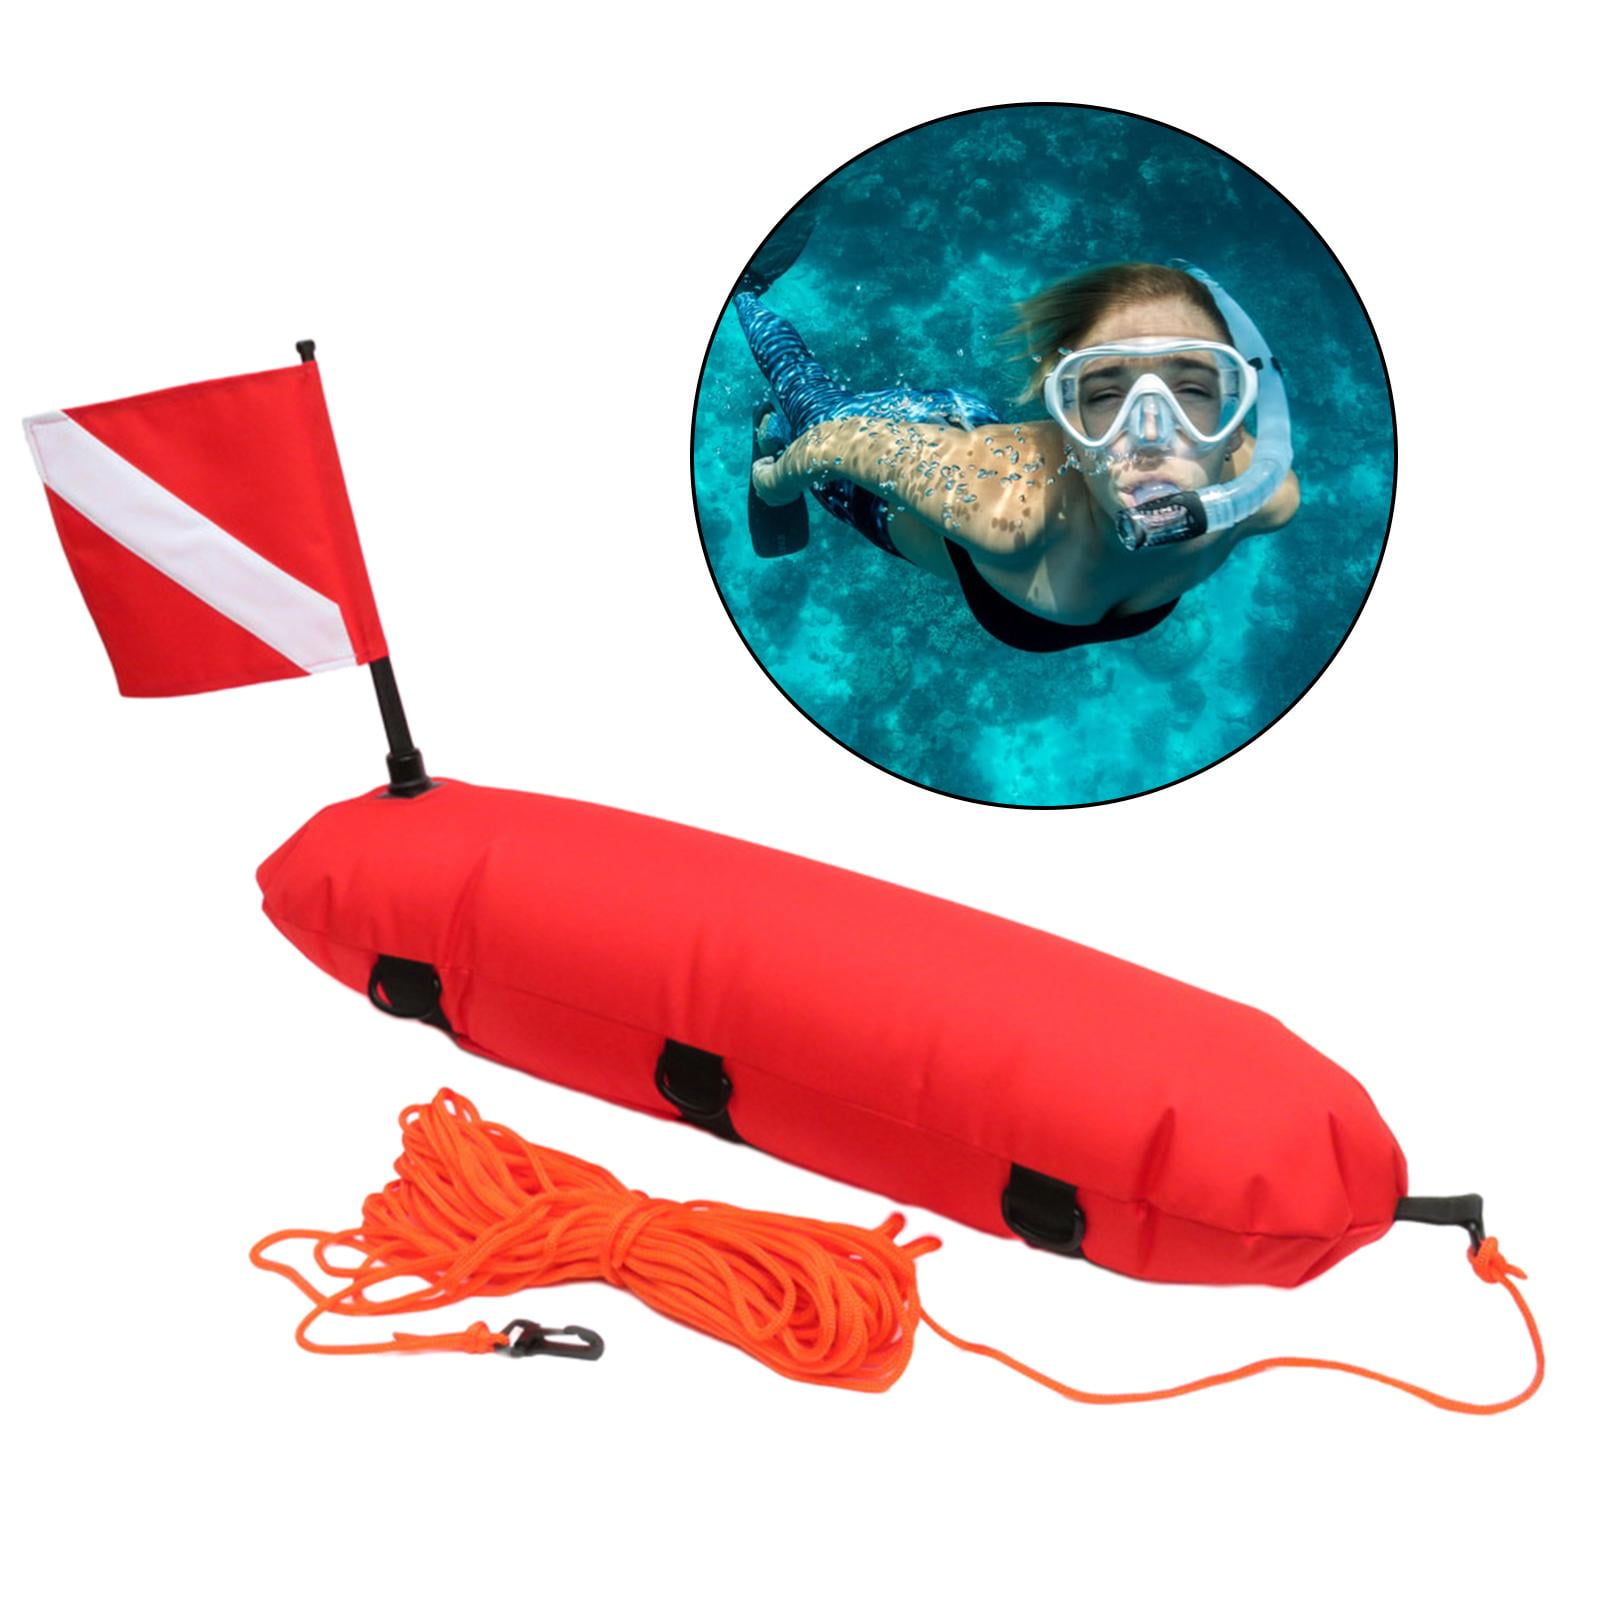 Inflatable Float Signal Board for Freediving, Scuba Diving, Dive Flag, Visibility  Orange, D-Rings, 25m Rope , Dive Flag for Snorkeling Spearfishing - Red,  78x25cm 